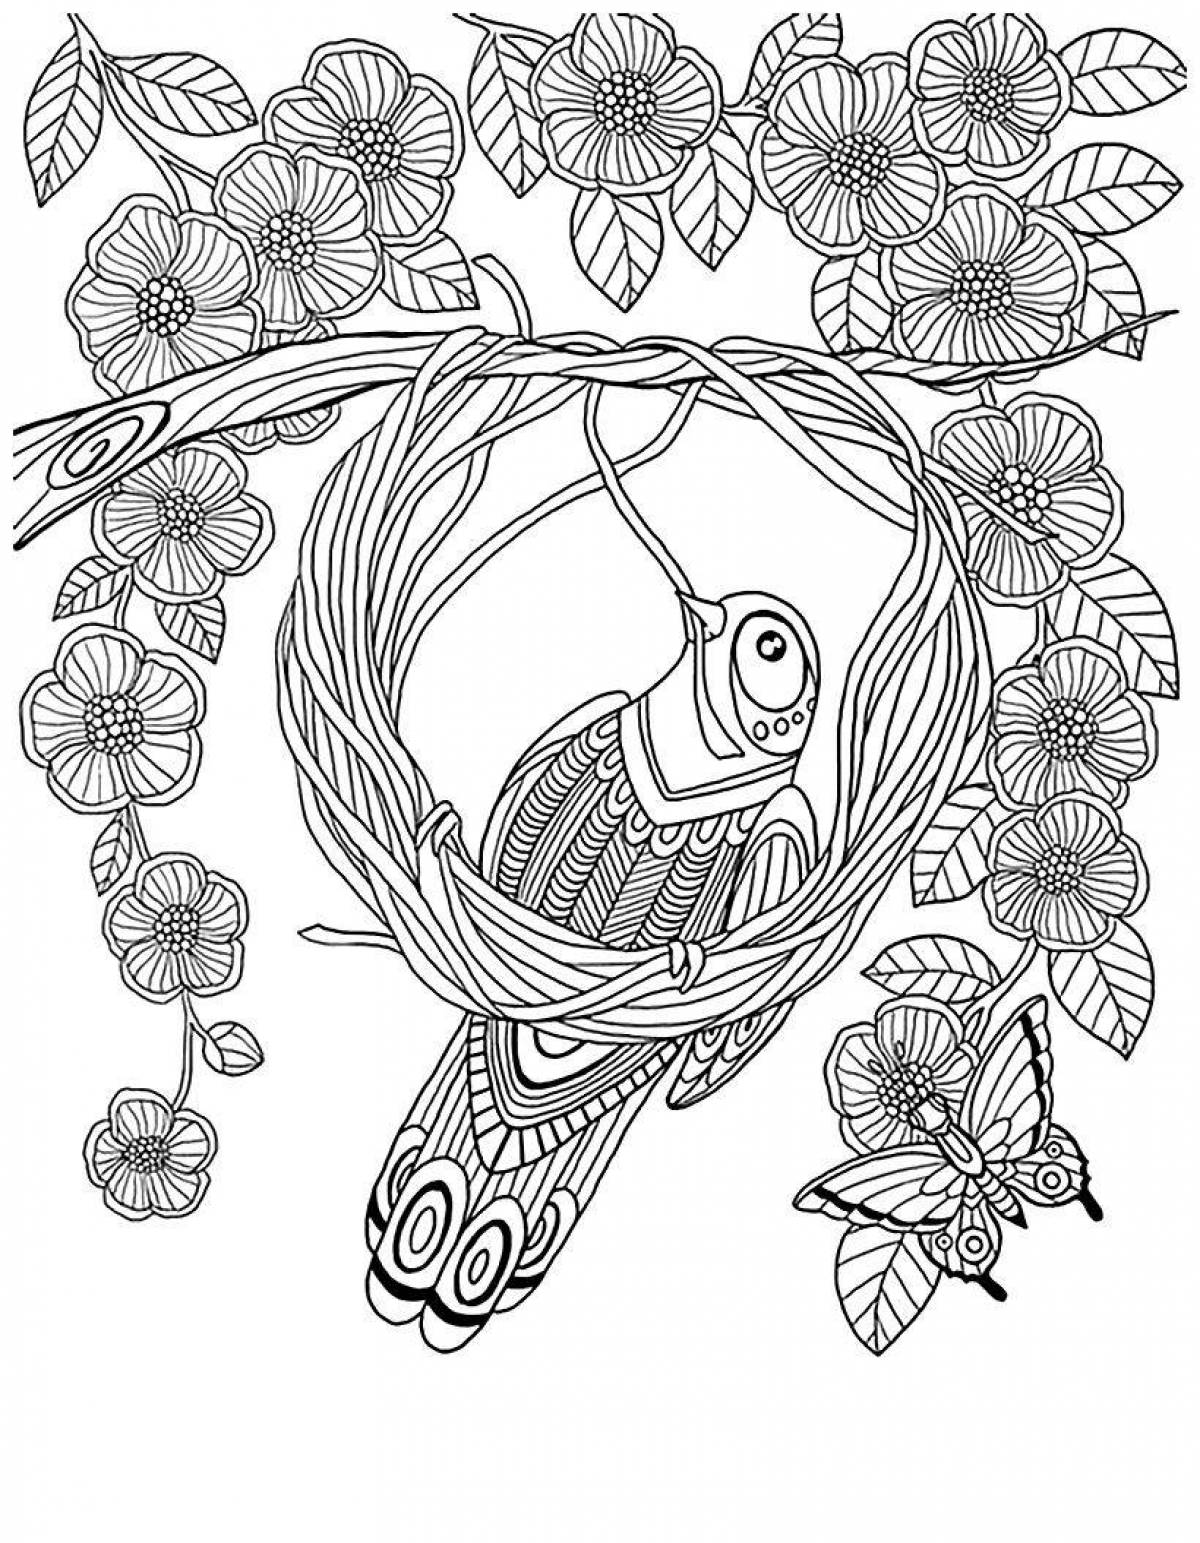 Anxious and soothing coloring book